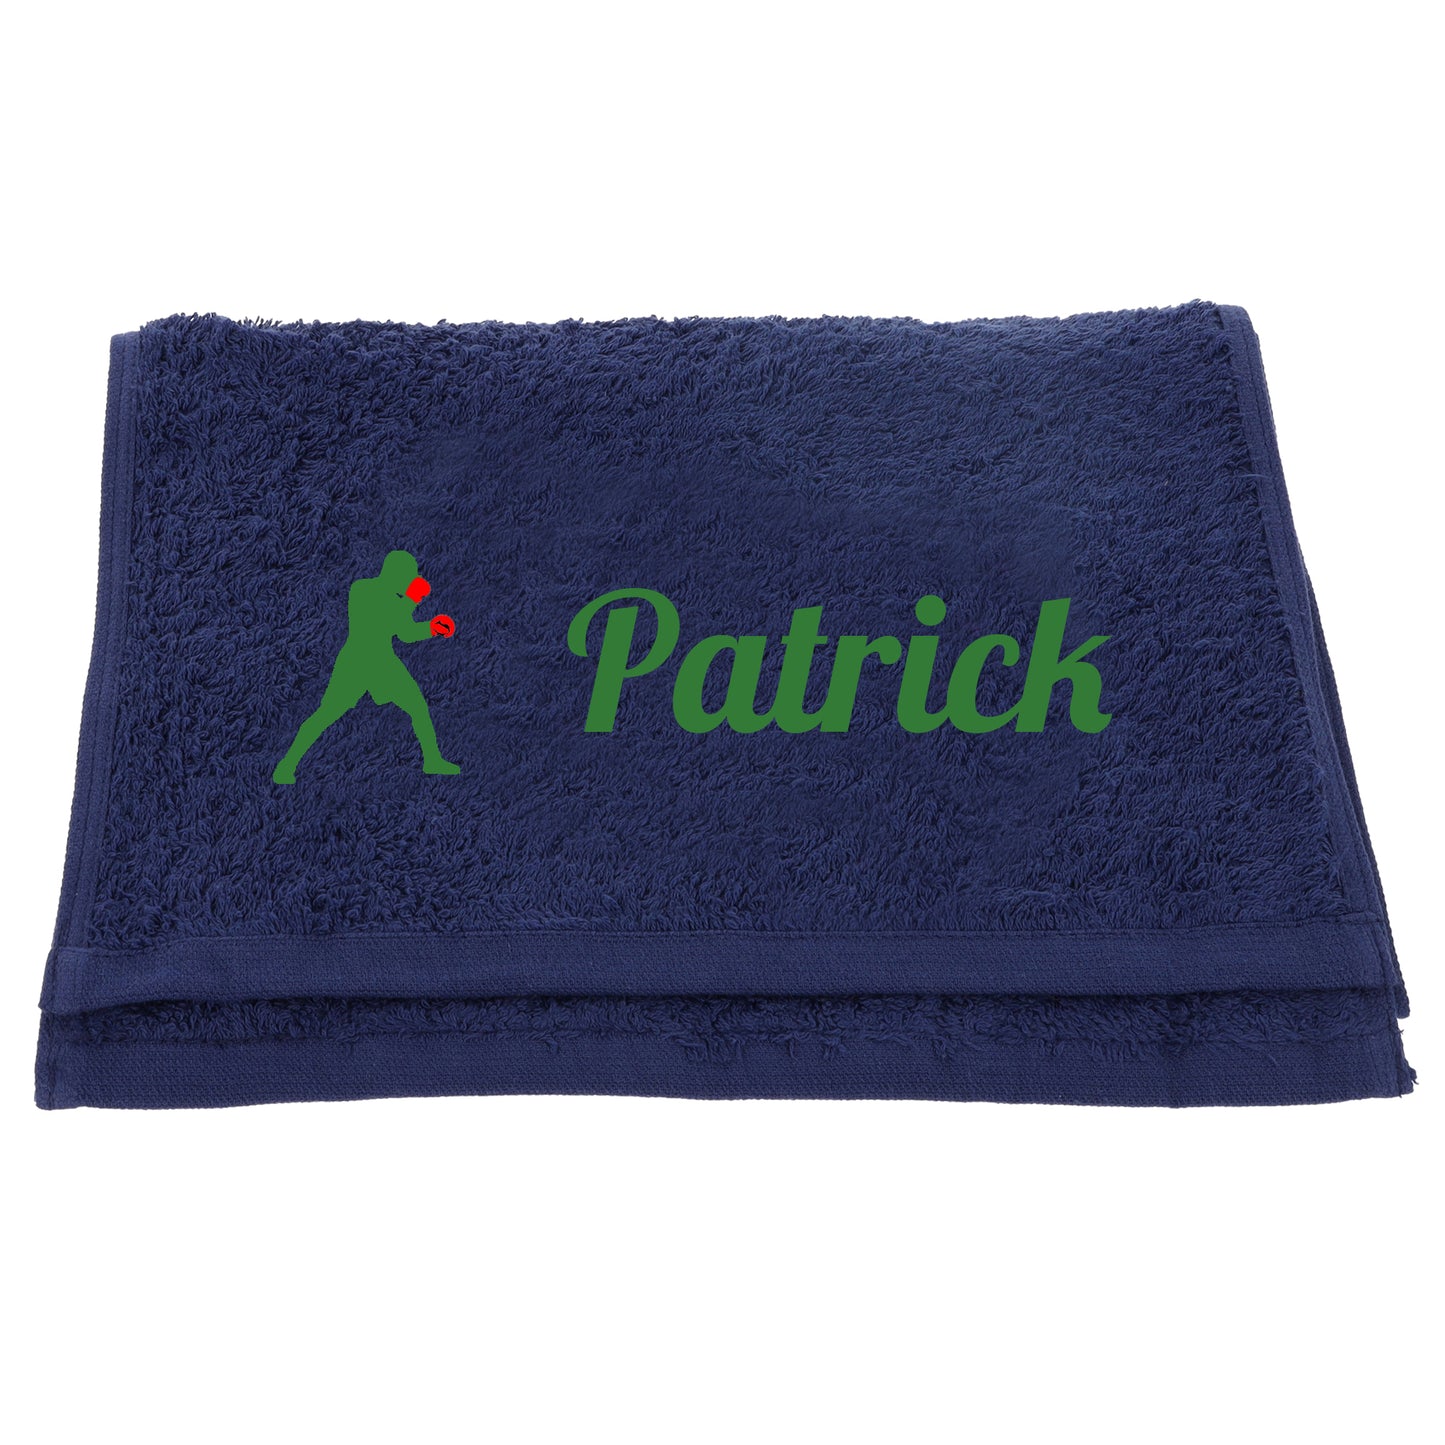 Personalised Embroidered Boxing Towel  - Always Looking Good - Navy  